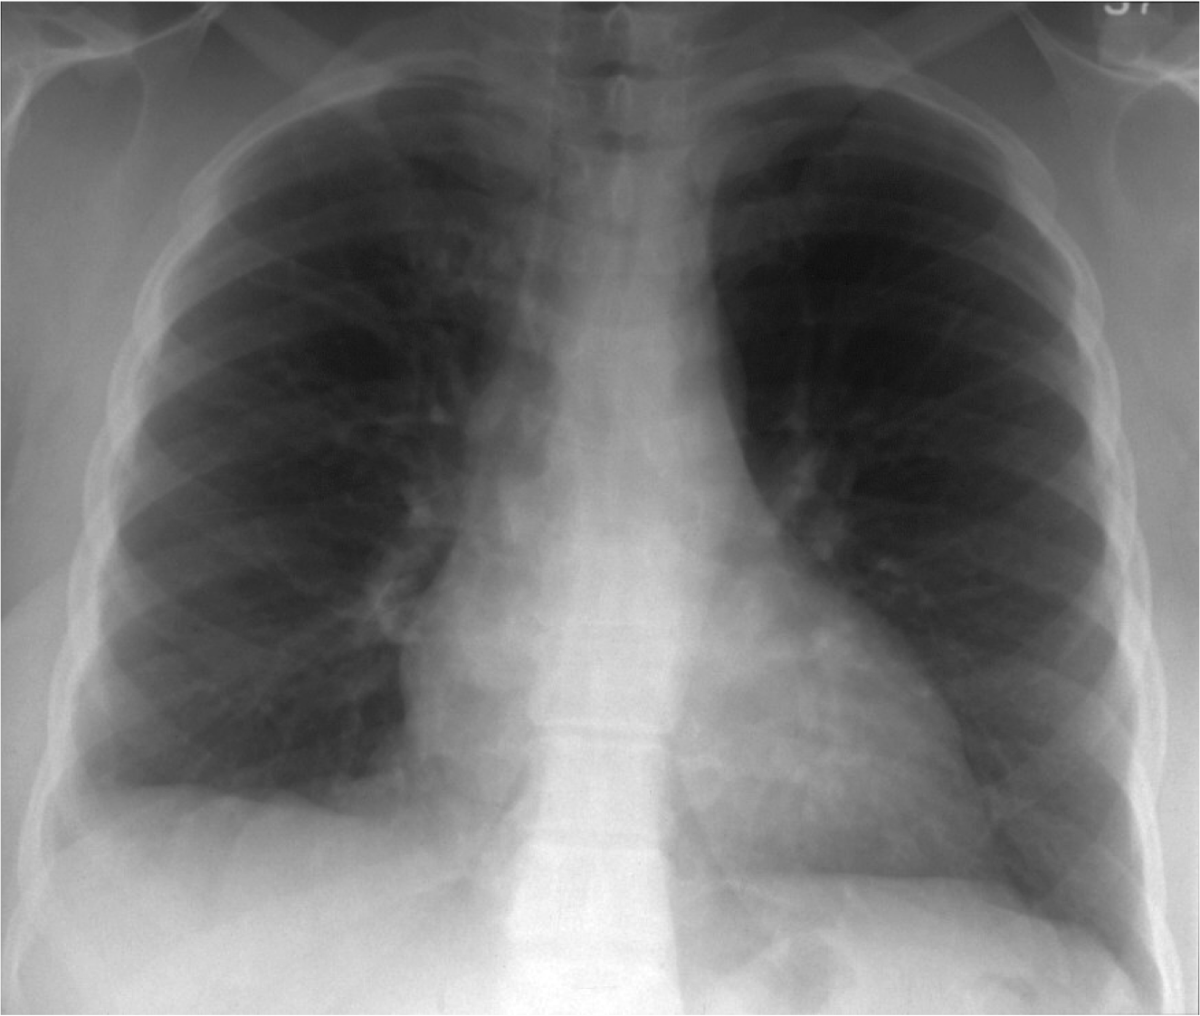 A normal chest x-ray showing all contours, the two lung parenchyma and pulmonary vessels with the bronchi branches